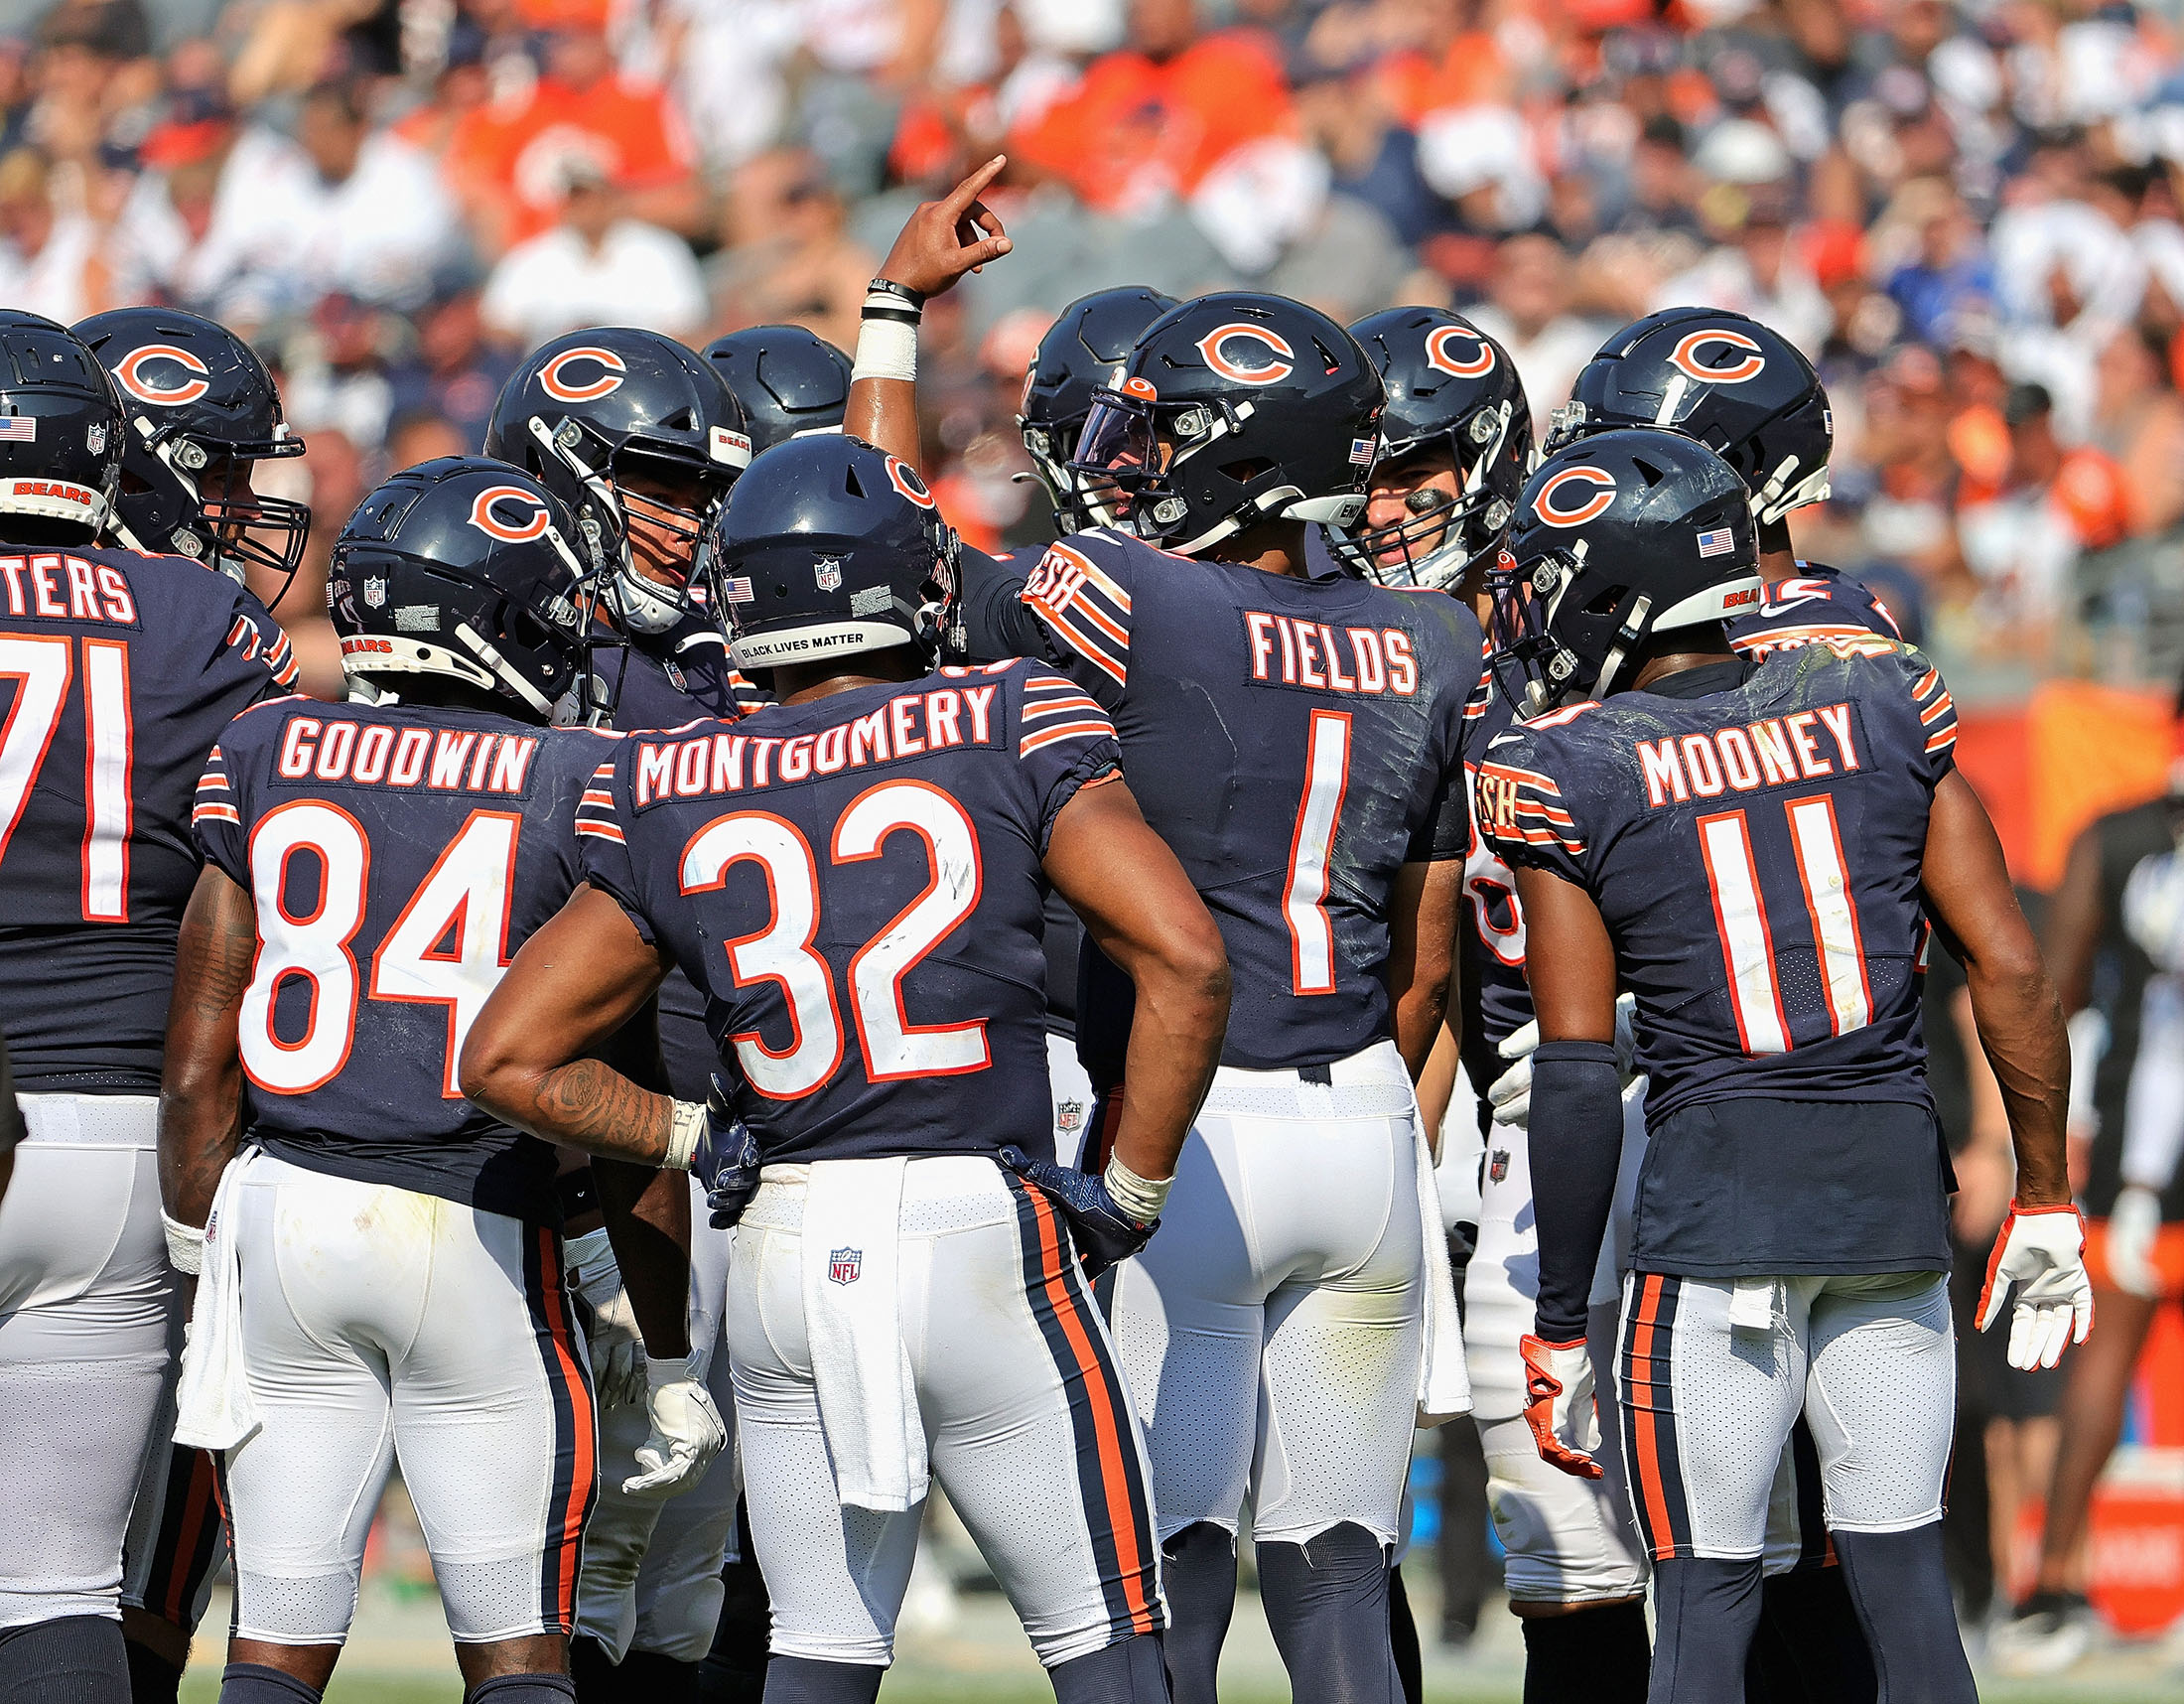 Chicago Bears ticket prices now depend on the team's opponent